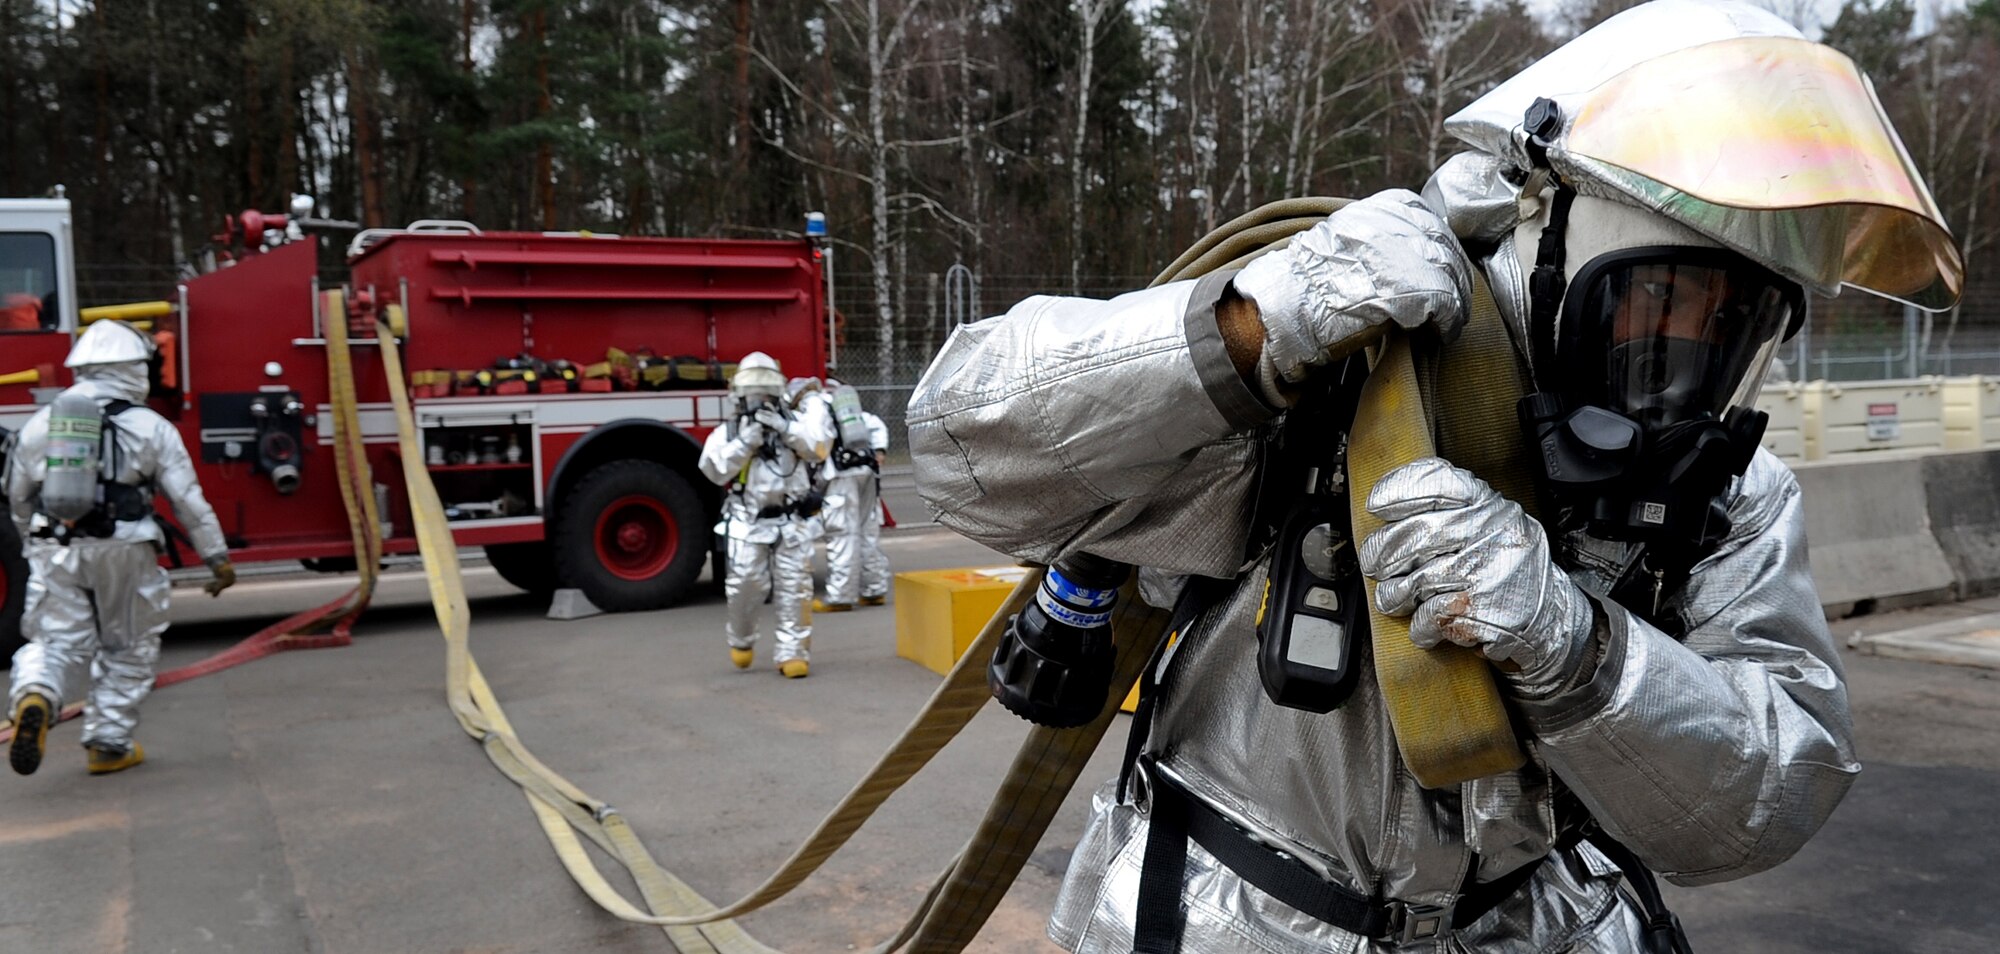 U.S. Air Force Senior Airman Nicholas Hayes, 886th Civil Engineer Squadron firefighter, prepares to put out a simulated fire during an exercise on Delta Base, Kapaun Air Station, Germany, March 25, 2010. The 886th CES firefighters conduct at least four exercises per month to ensure readiness in the event of real-world fires. (U.S. Air Force photo by Airman 1st Class Grovert Fuentes-Contreras)(Released)